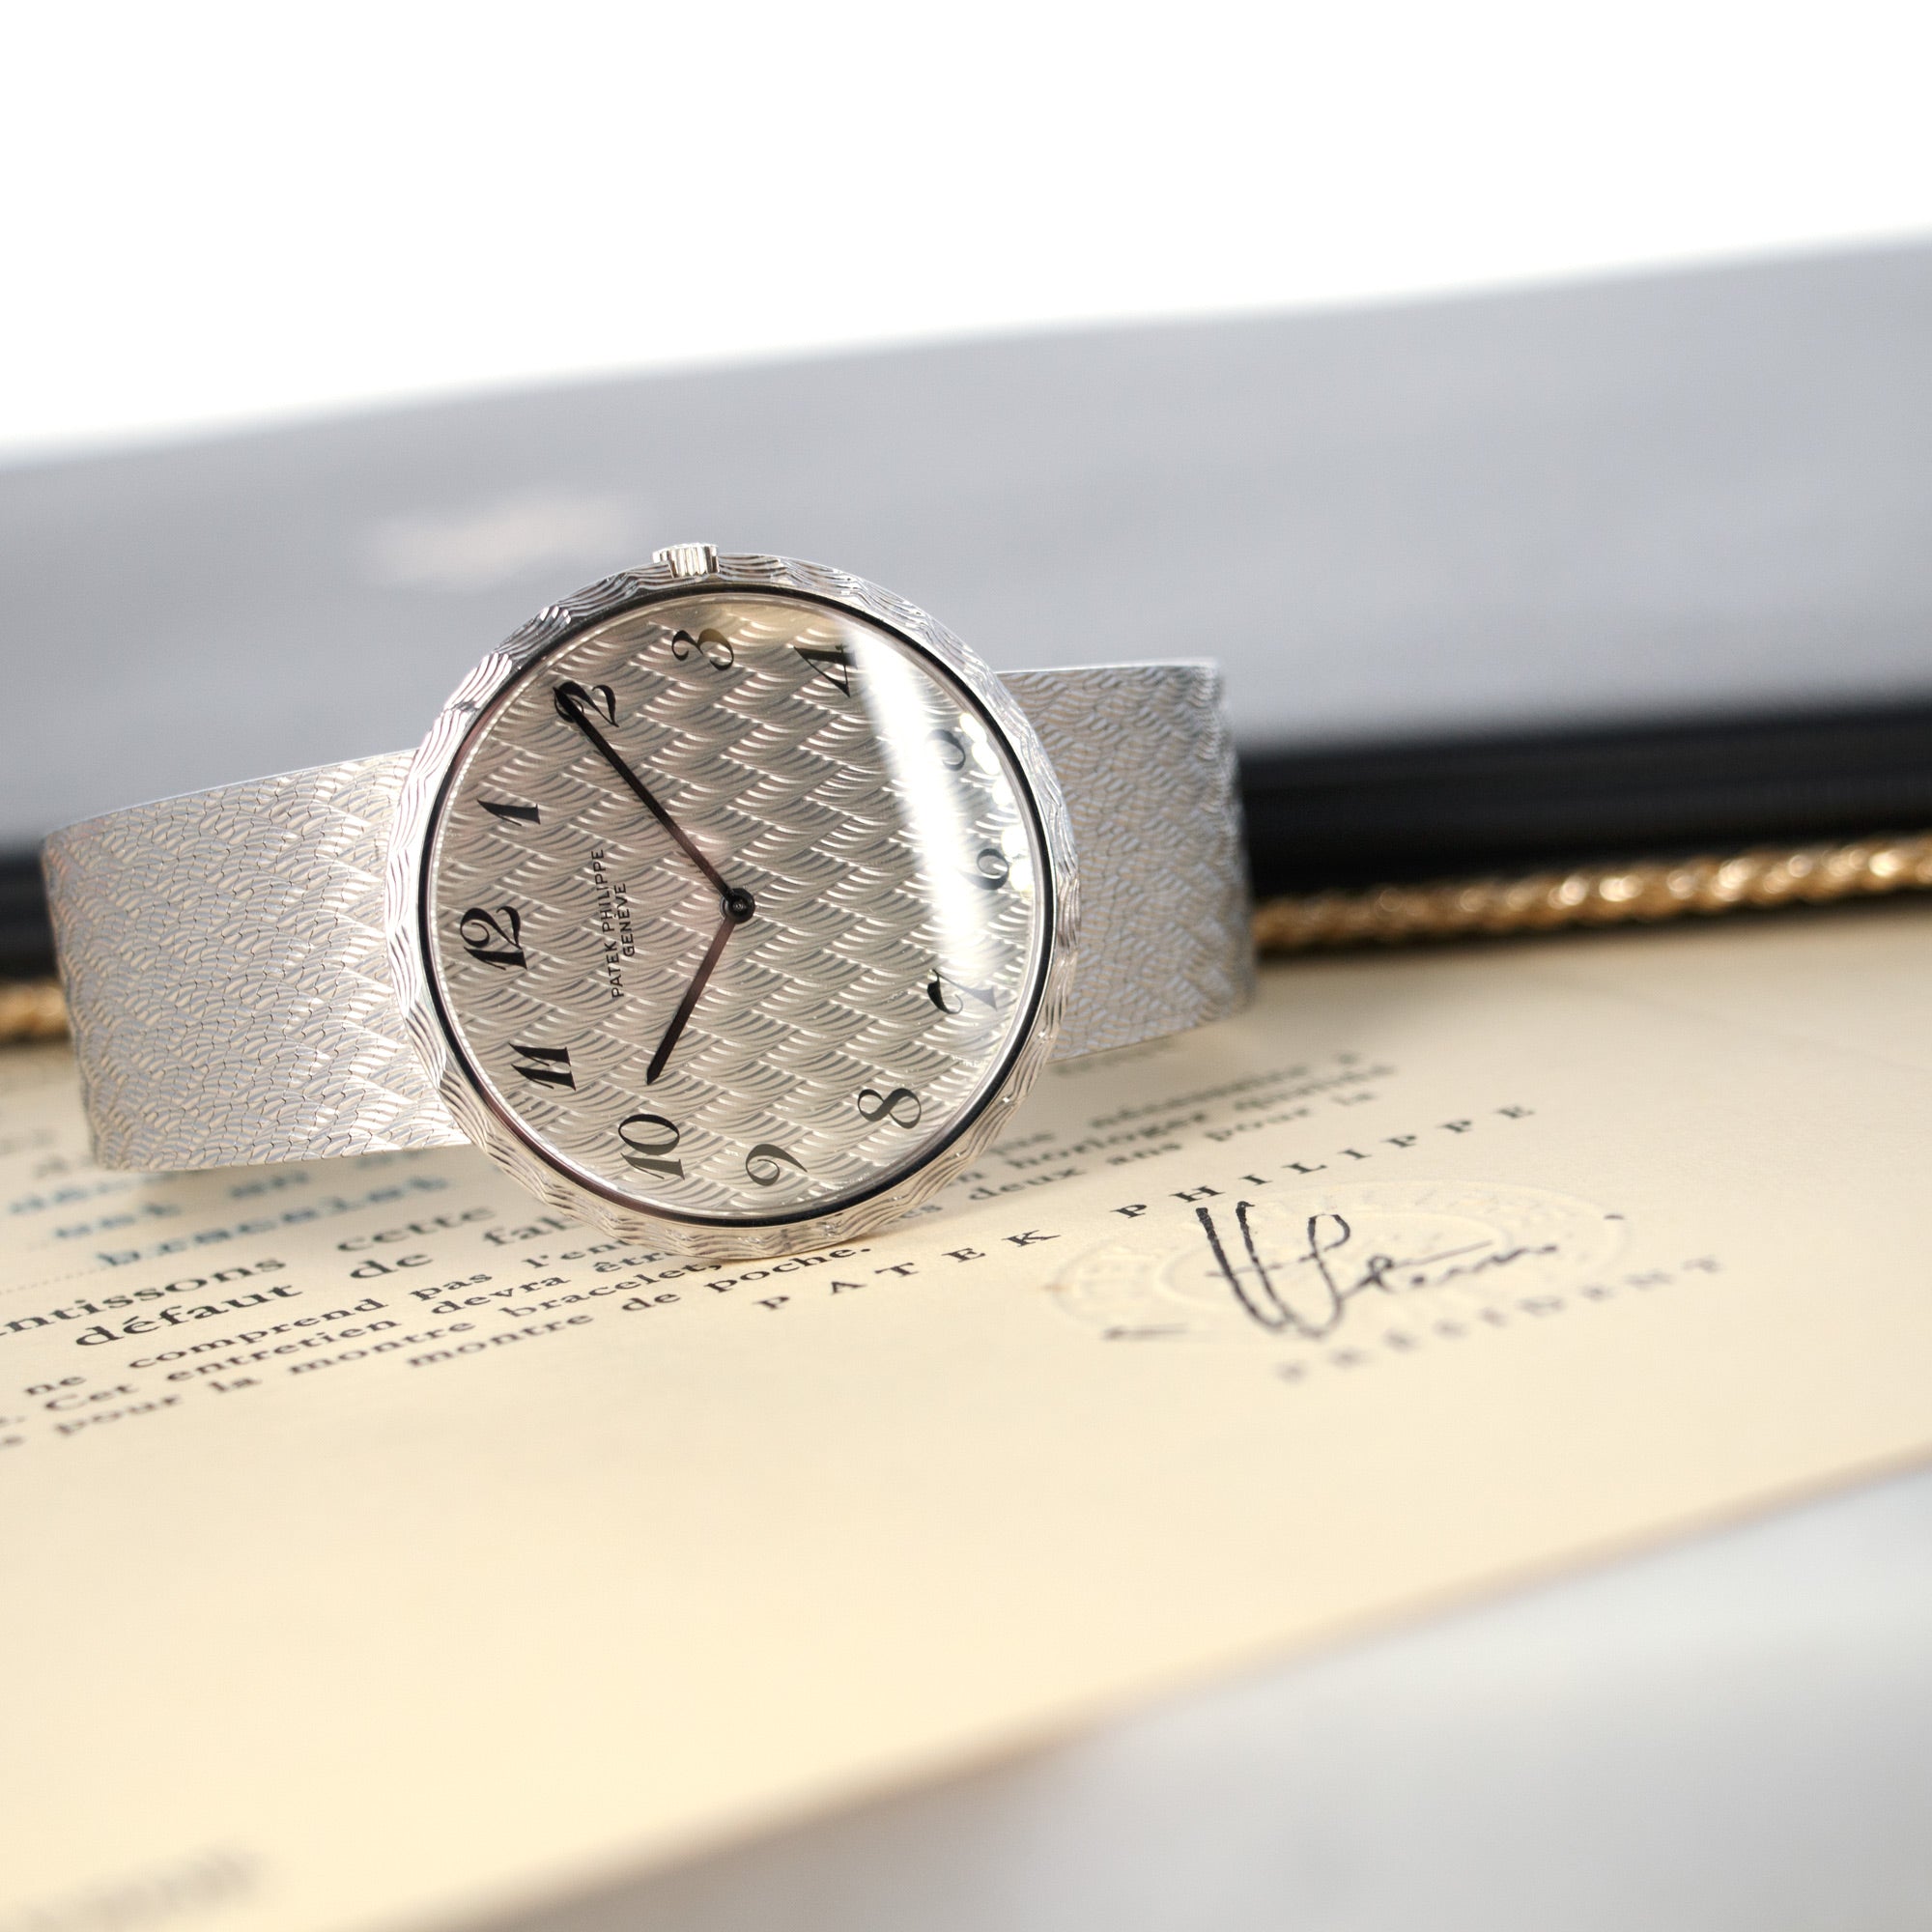 Patek Philippe White Gold Automatic Calatrava Watch Ref. 3588, with Original Box and Papers